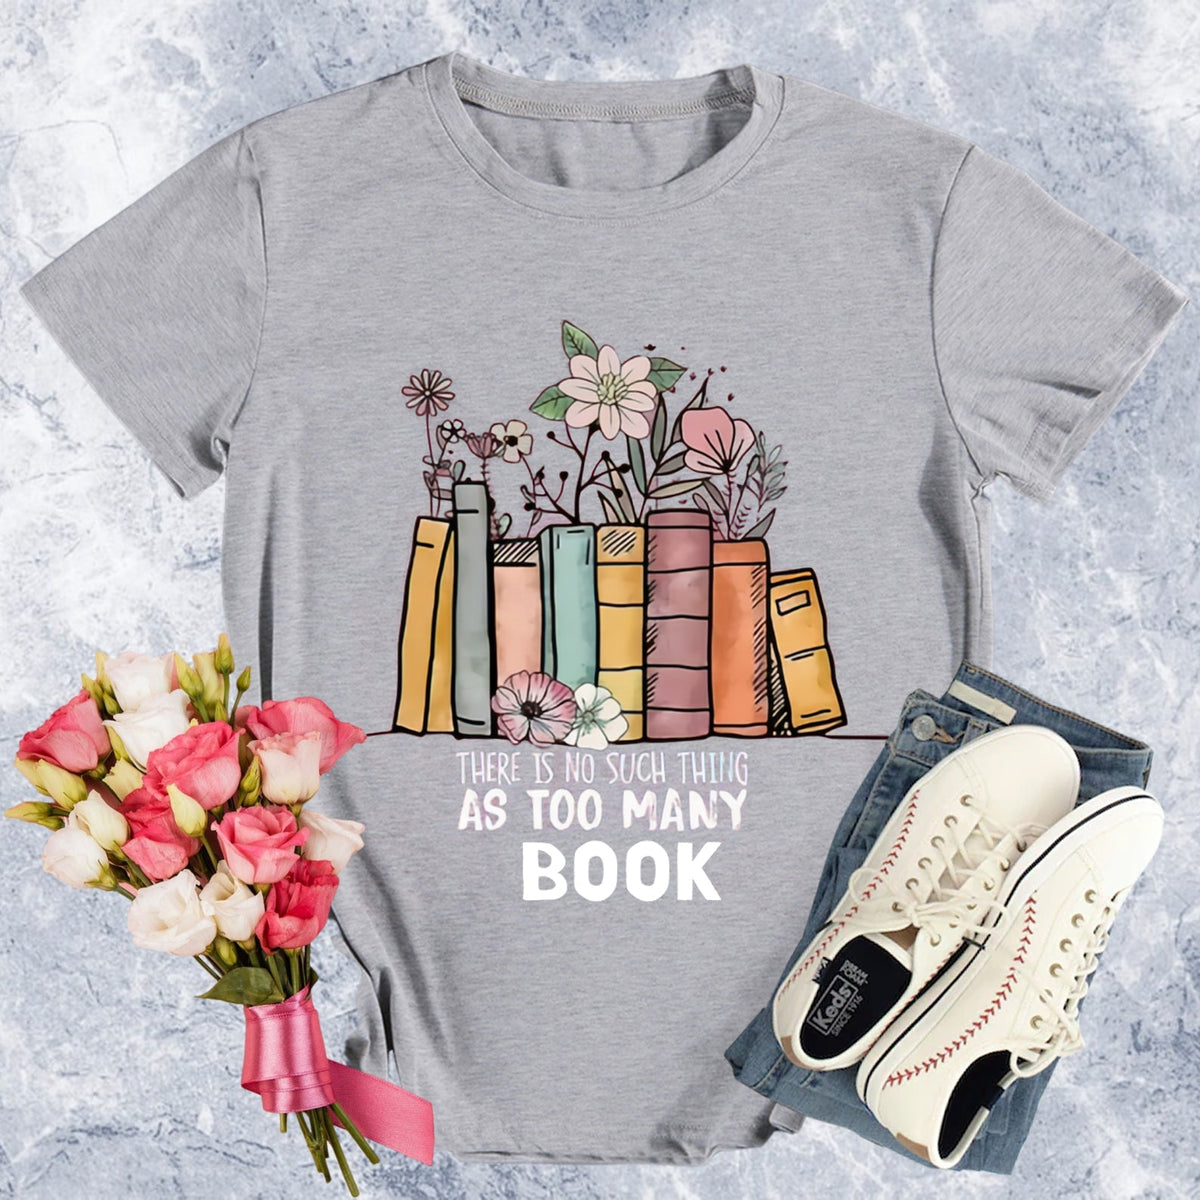 There Is No Such Thing As Too Many Books T-shirt